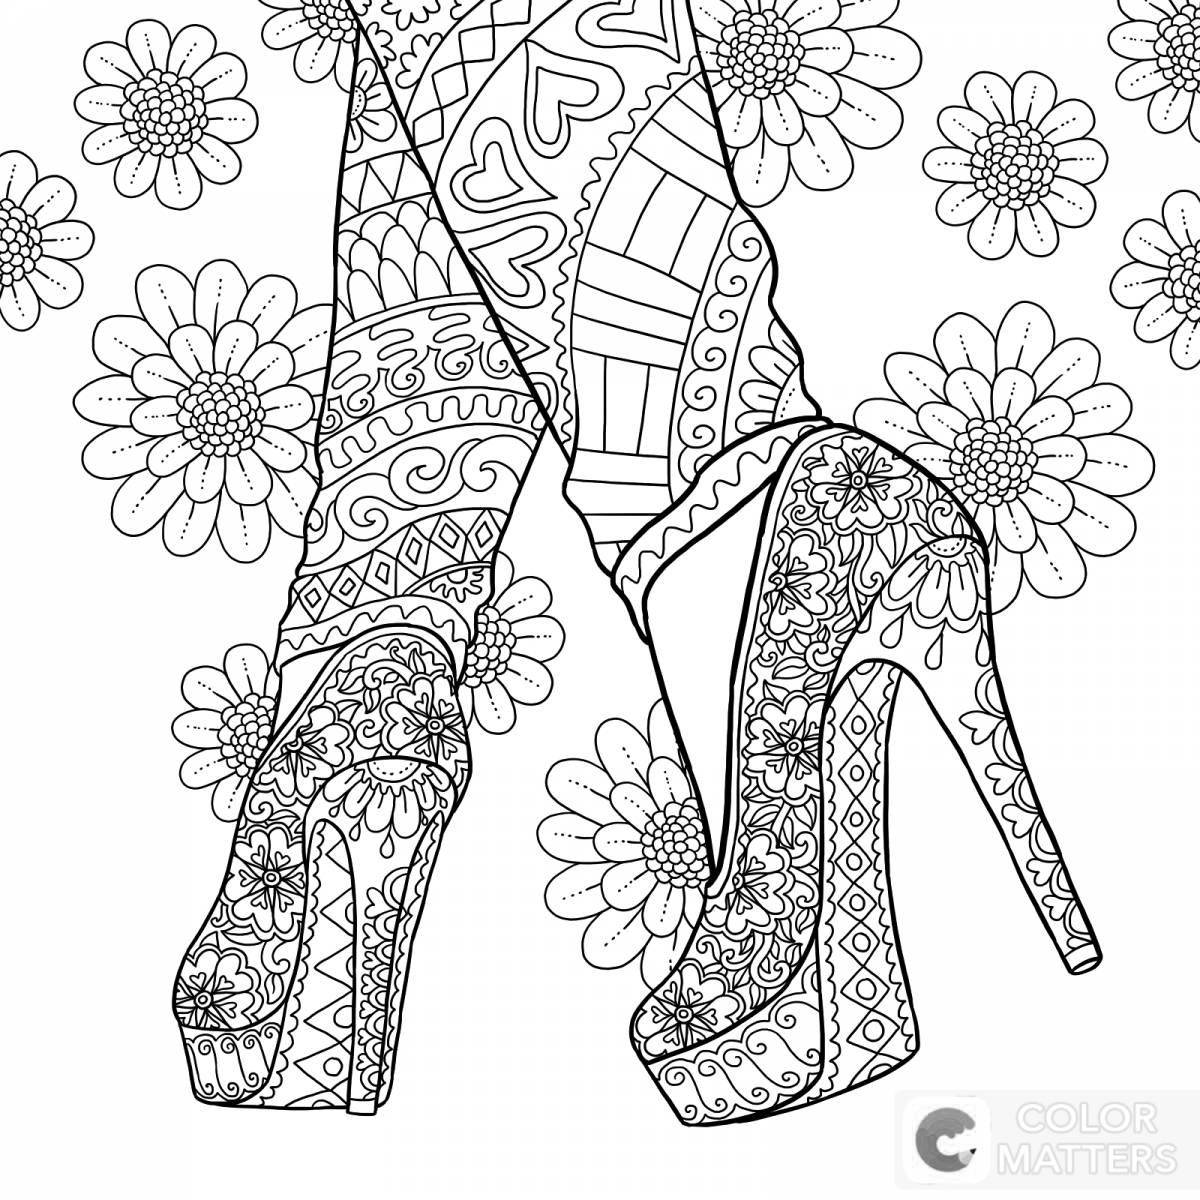 Glorious anti-stress coloring book for girls 13 years old